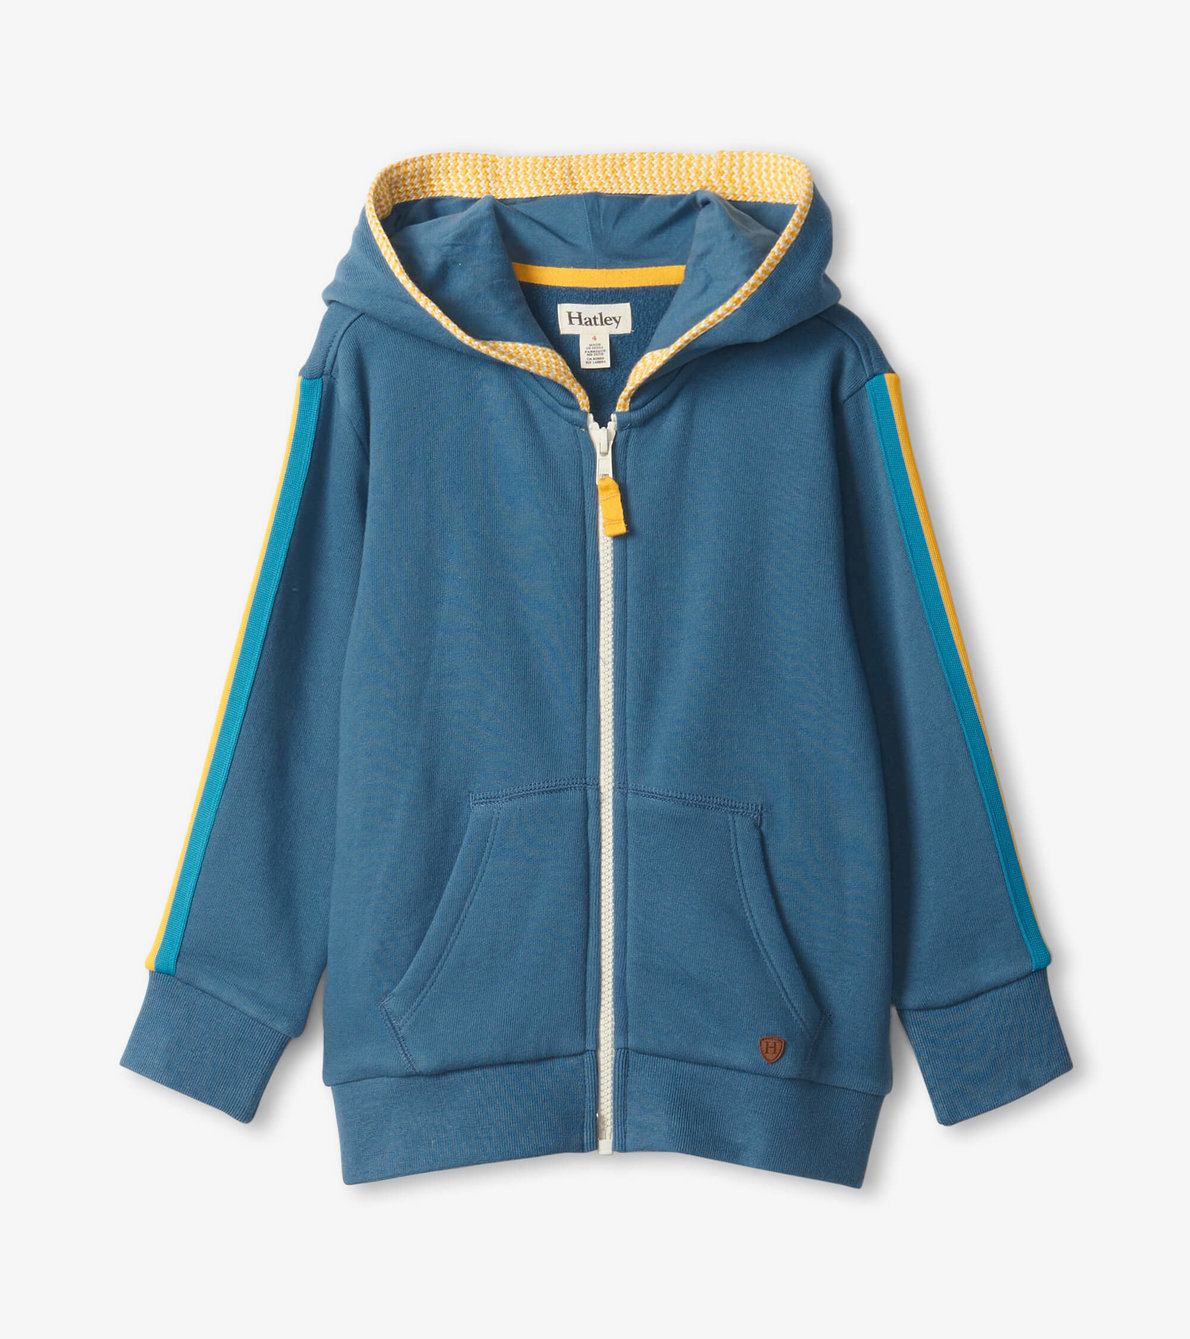 View larger image of Boys Striped Zip-Up Hoodie